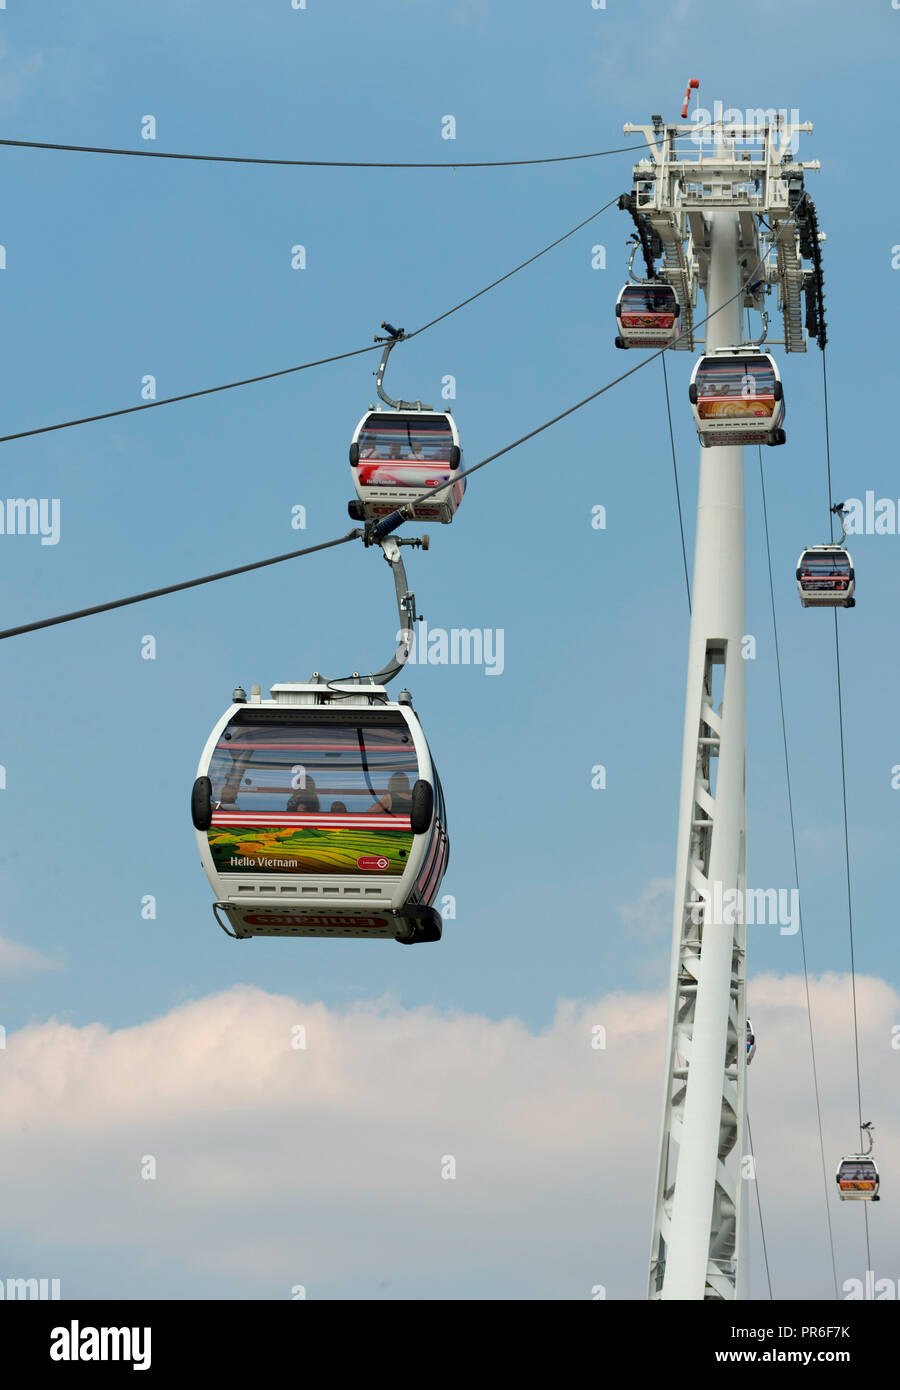 Emirates Cable Car Greenwich London UK Stock Photo